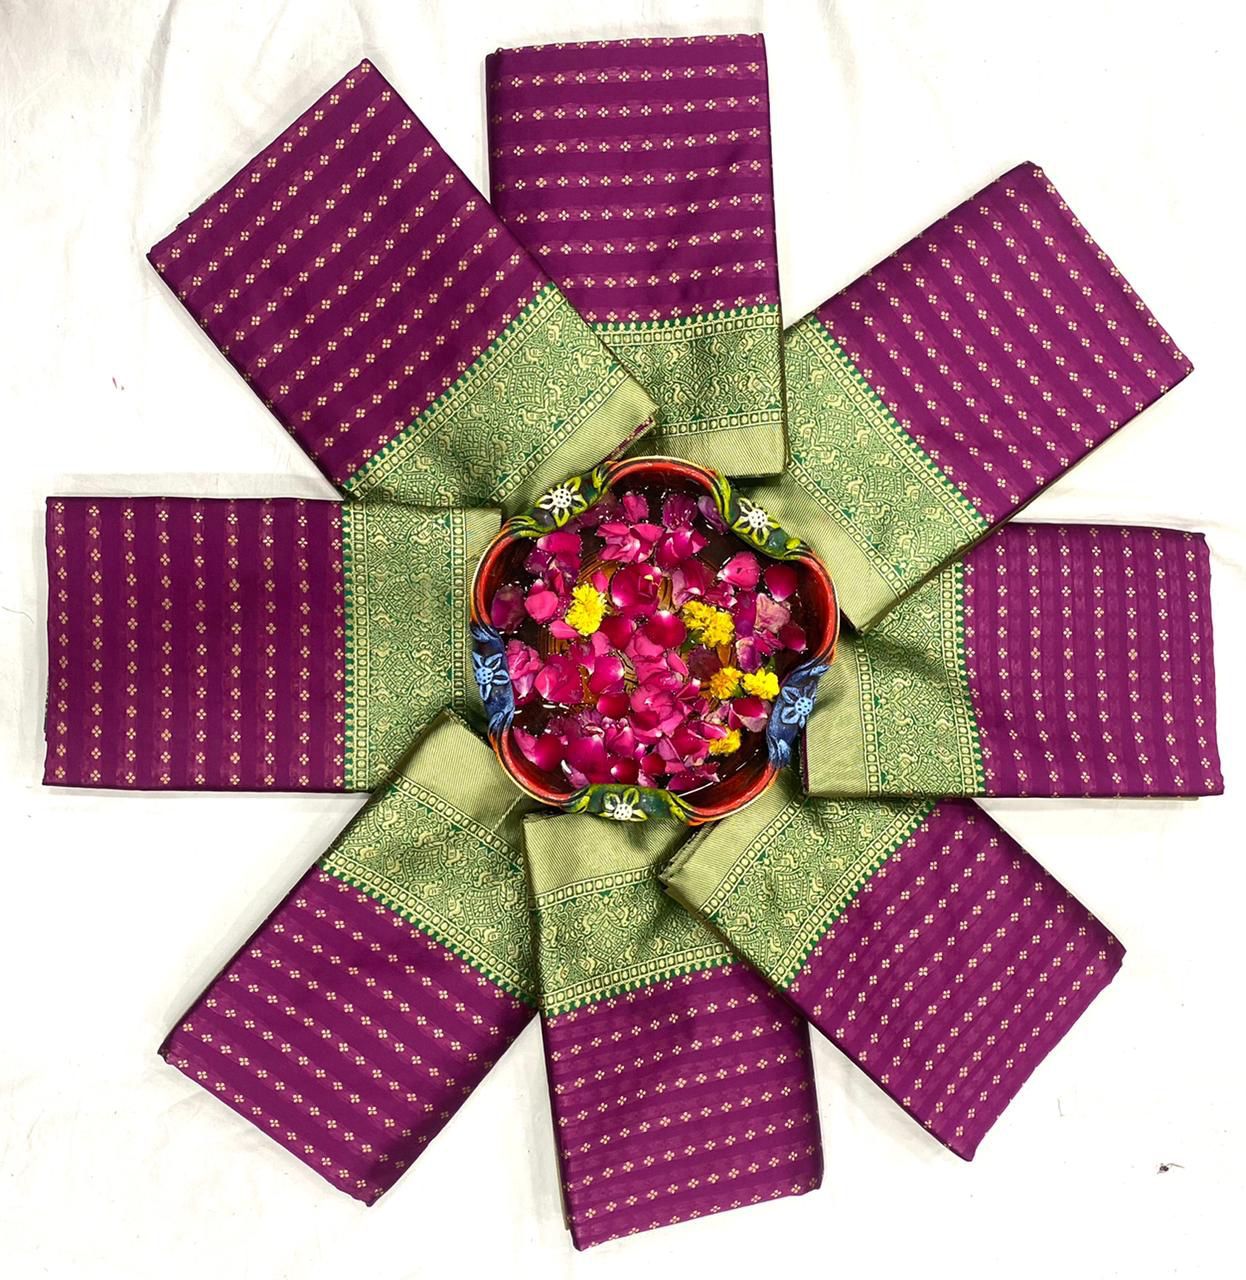 Rose n Wrap: Saree Packing done in Flower theme | Wedding gift pack,  Wedding gifts packaging, Bridal gift wrapping ideas